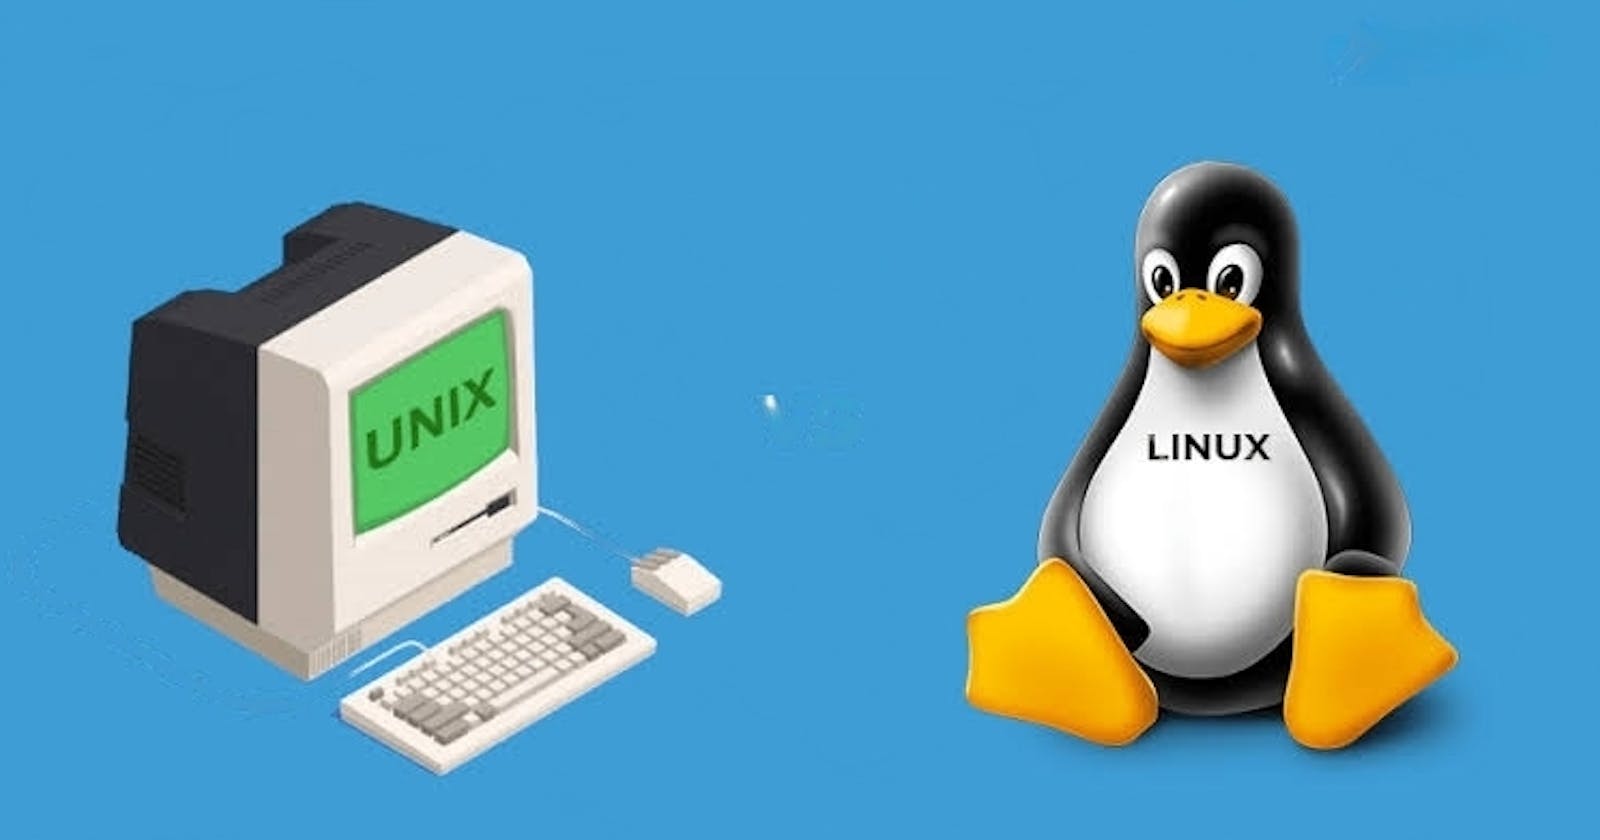 What is the difference between Linux and Unix operating systems?